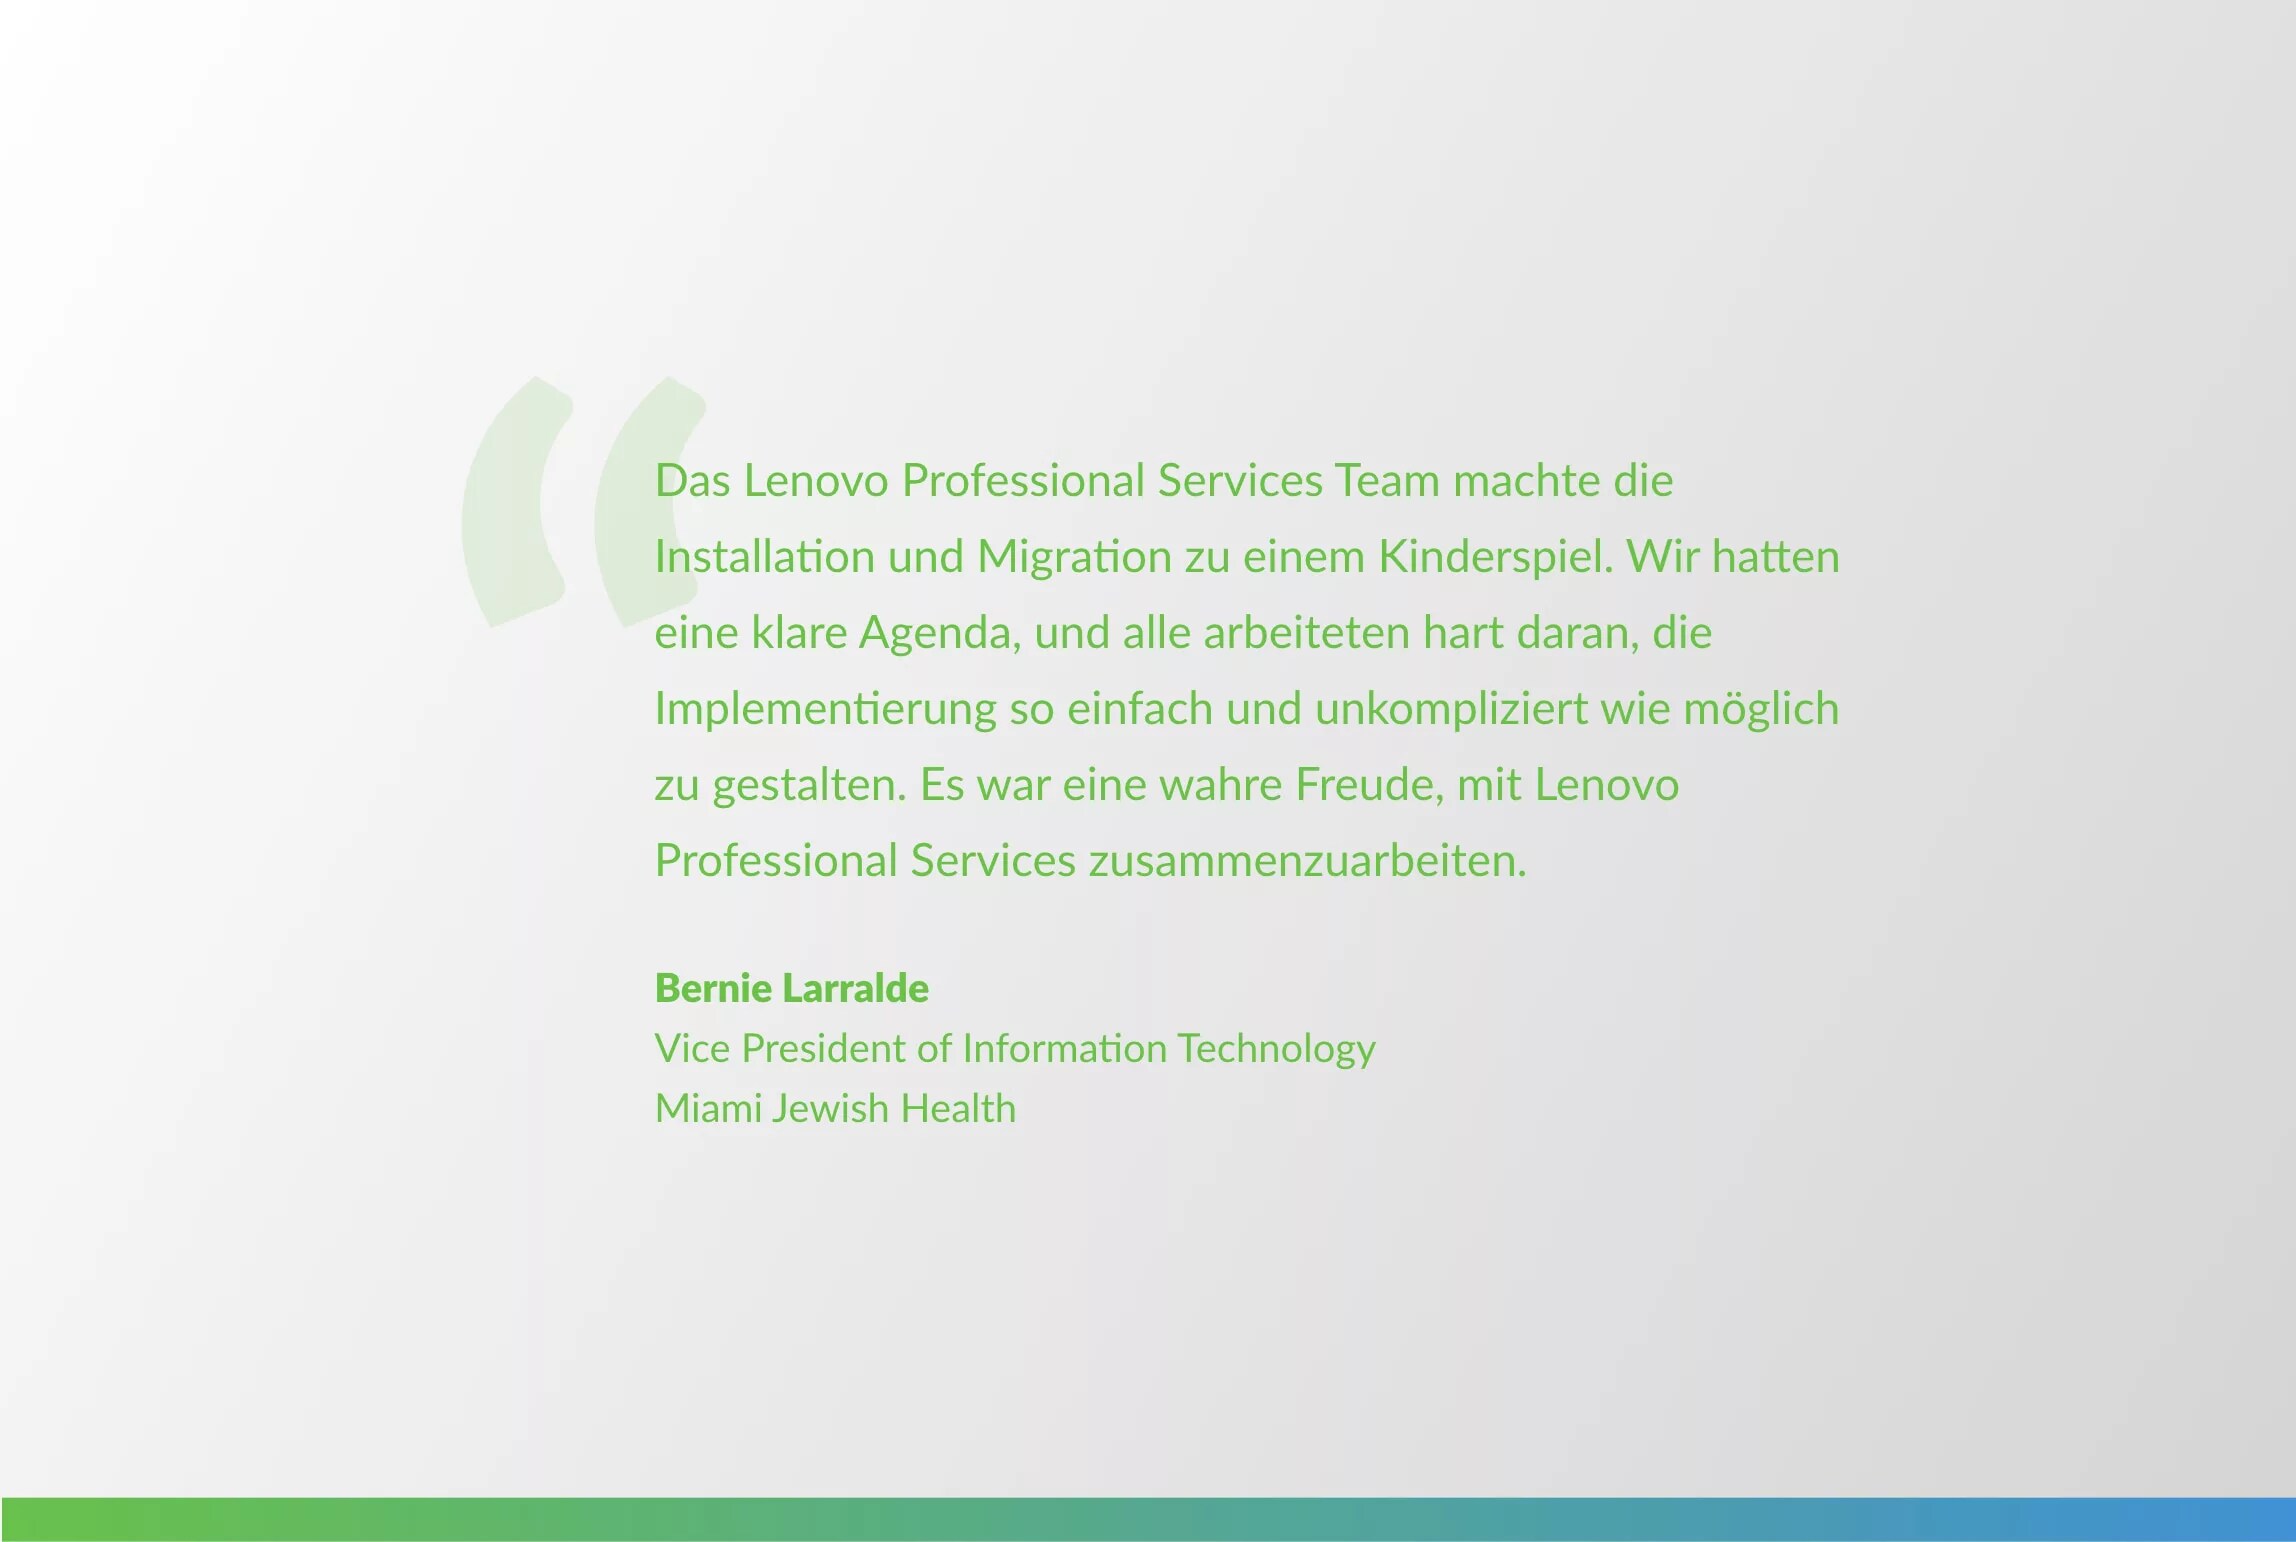 quote from Bernie Larralde: The Lenovo Professional Services team made the intallation and migration a breeze. We had a clear agenda, and everyone worked hard to make the implementation as easy and straightforward as possible. It was a real pleasure working with Lenovo Professional Services.